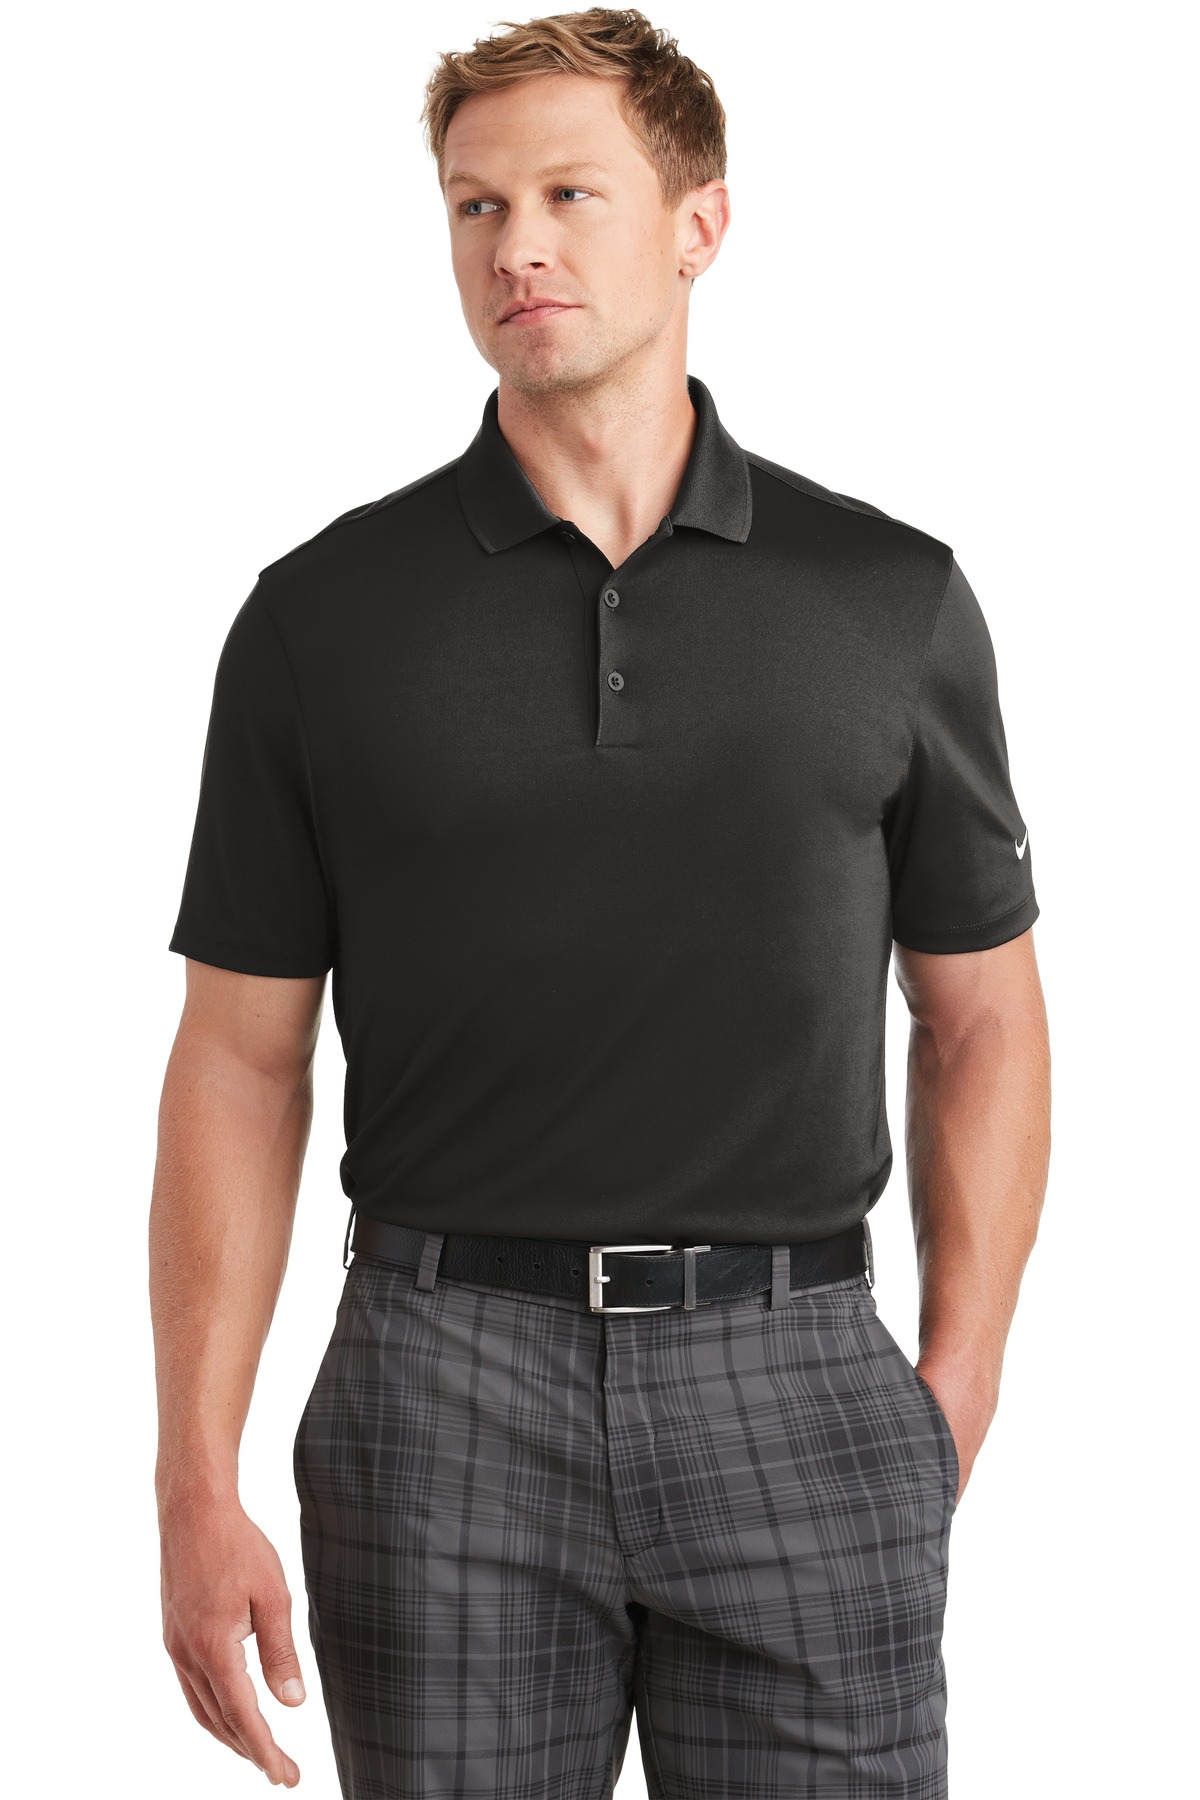 Nike Dri-FIT Classic Fit Players Polo with Flat Knit...